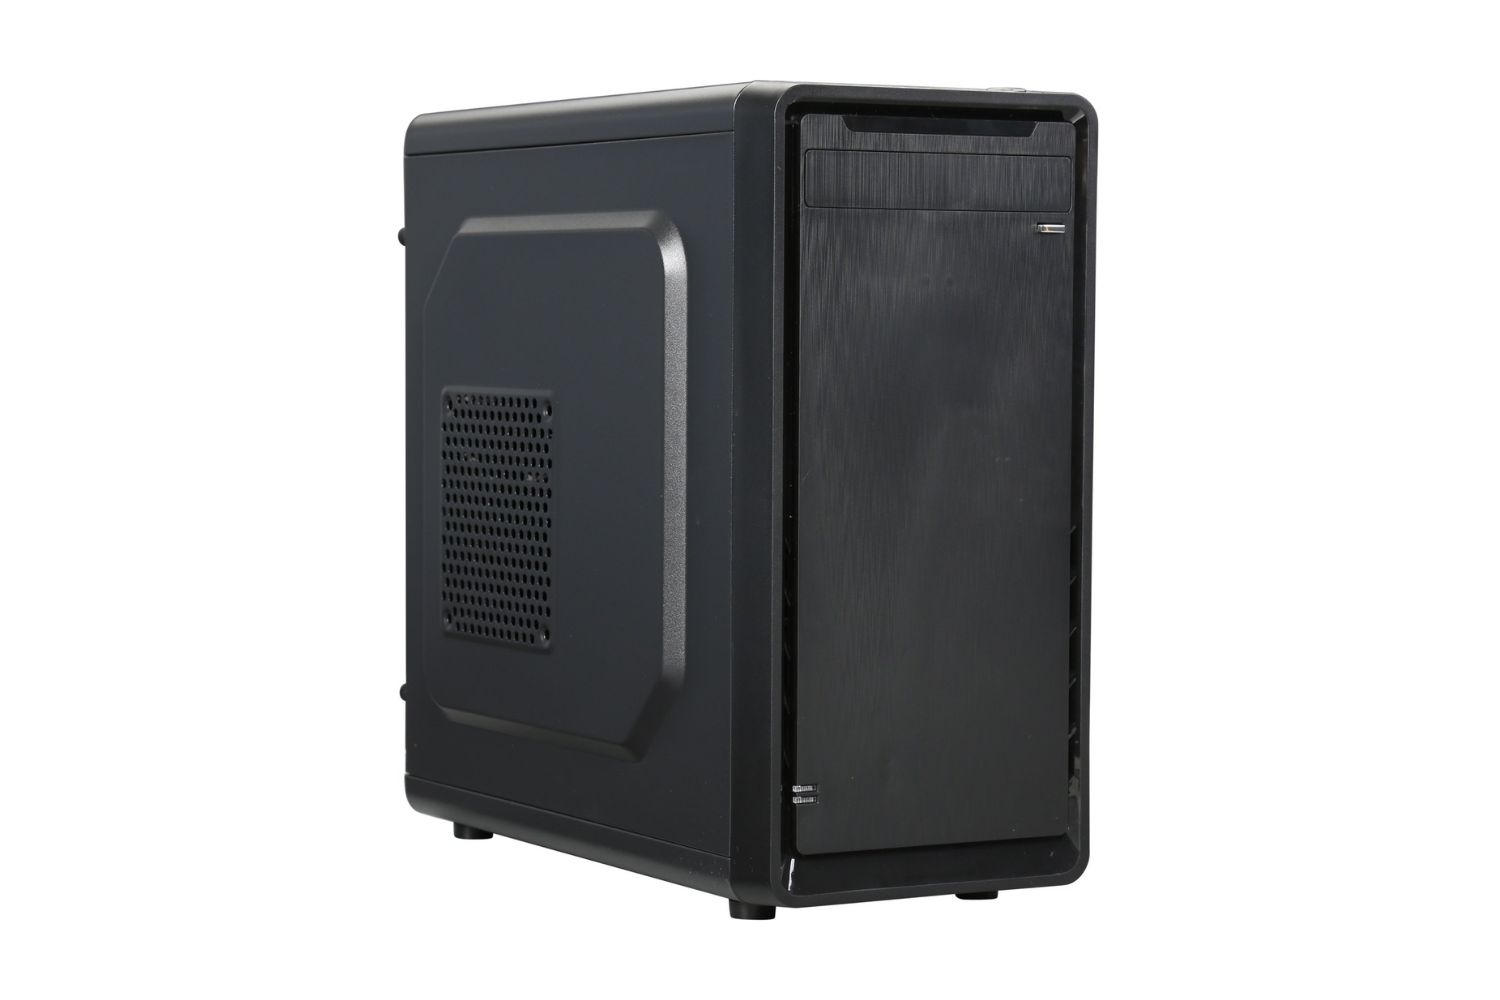 what-type-of-cpu-cooler-is-compatible-with-rosewill-srm-01-microatx-mini-tower-case